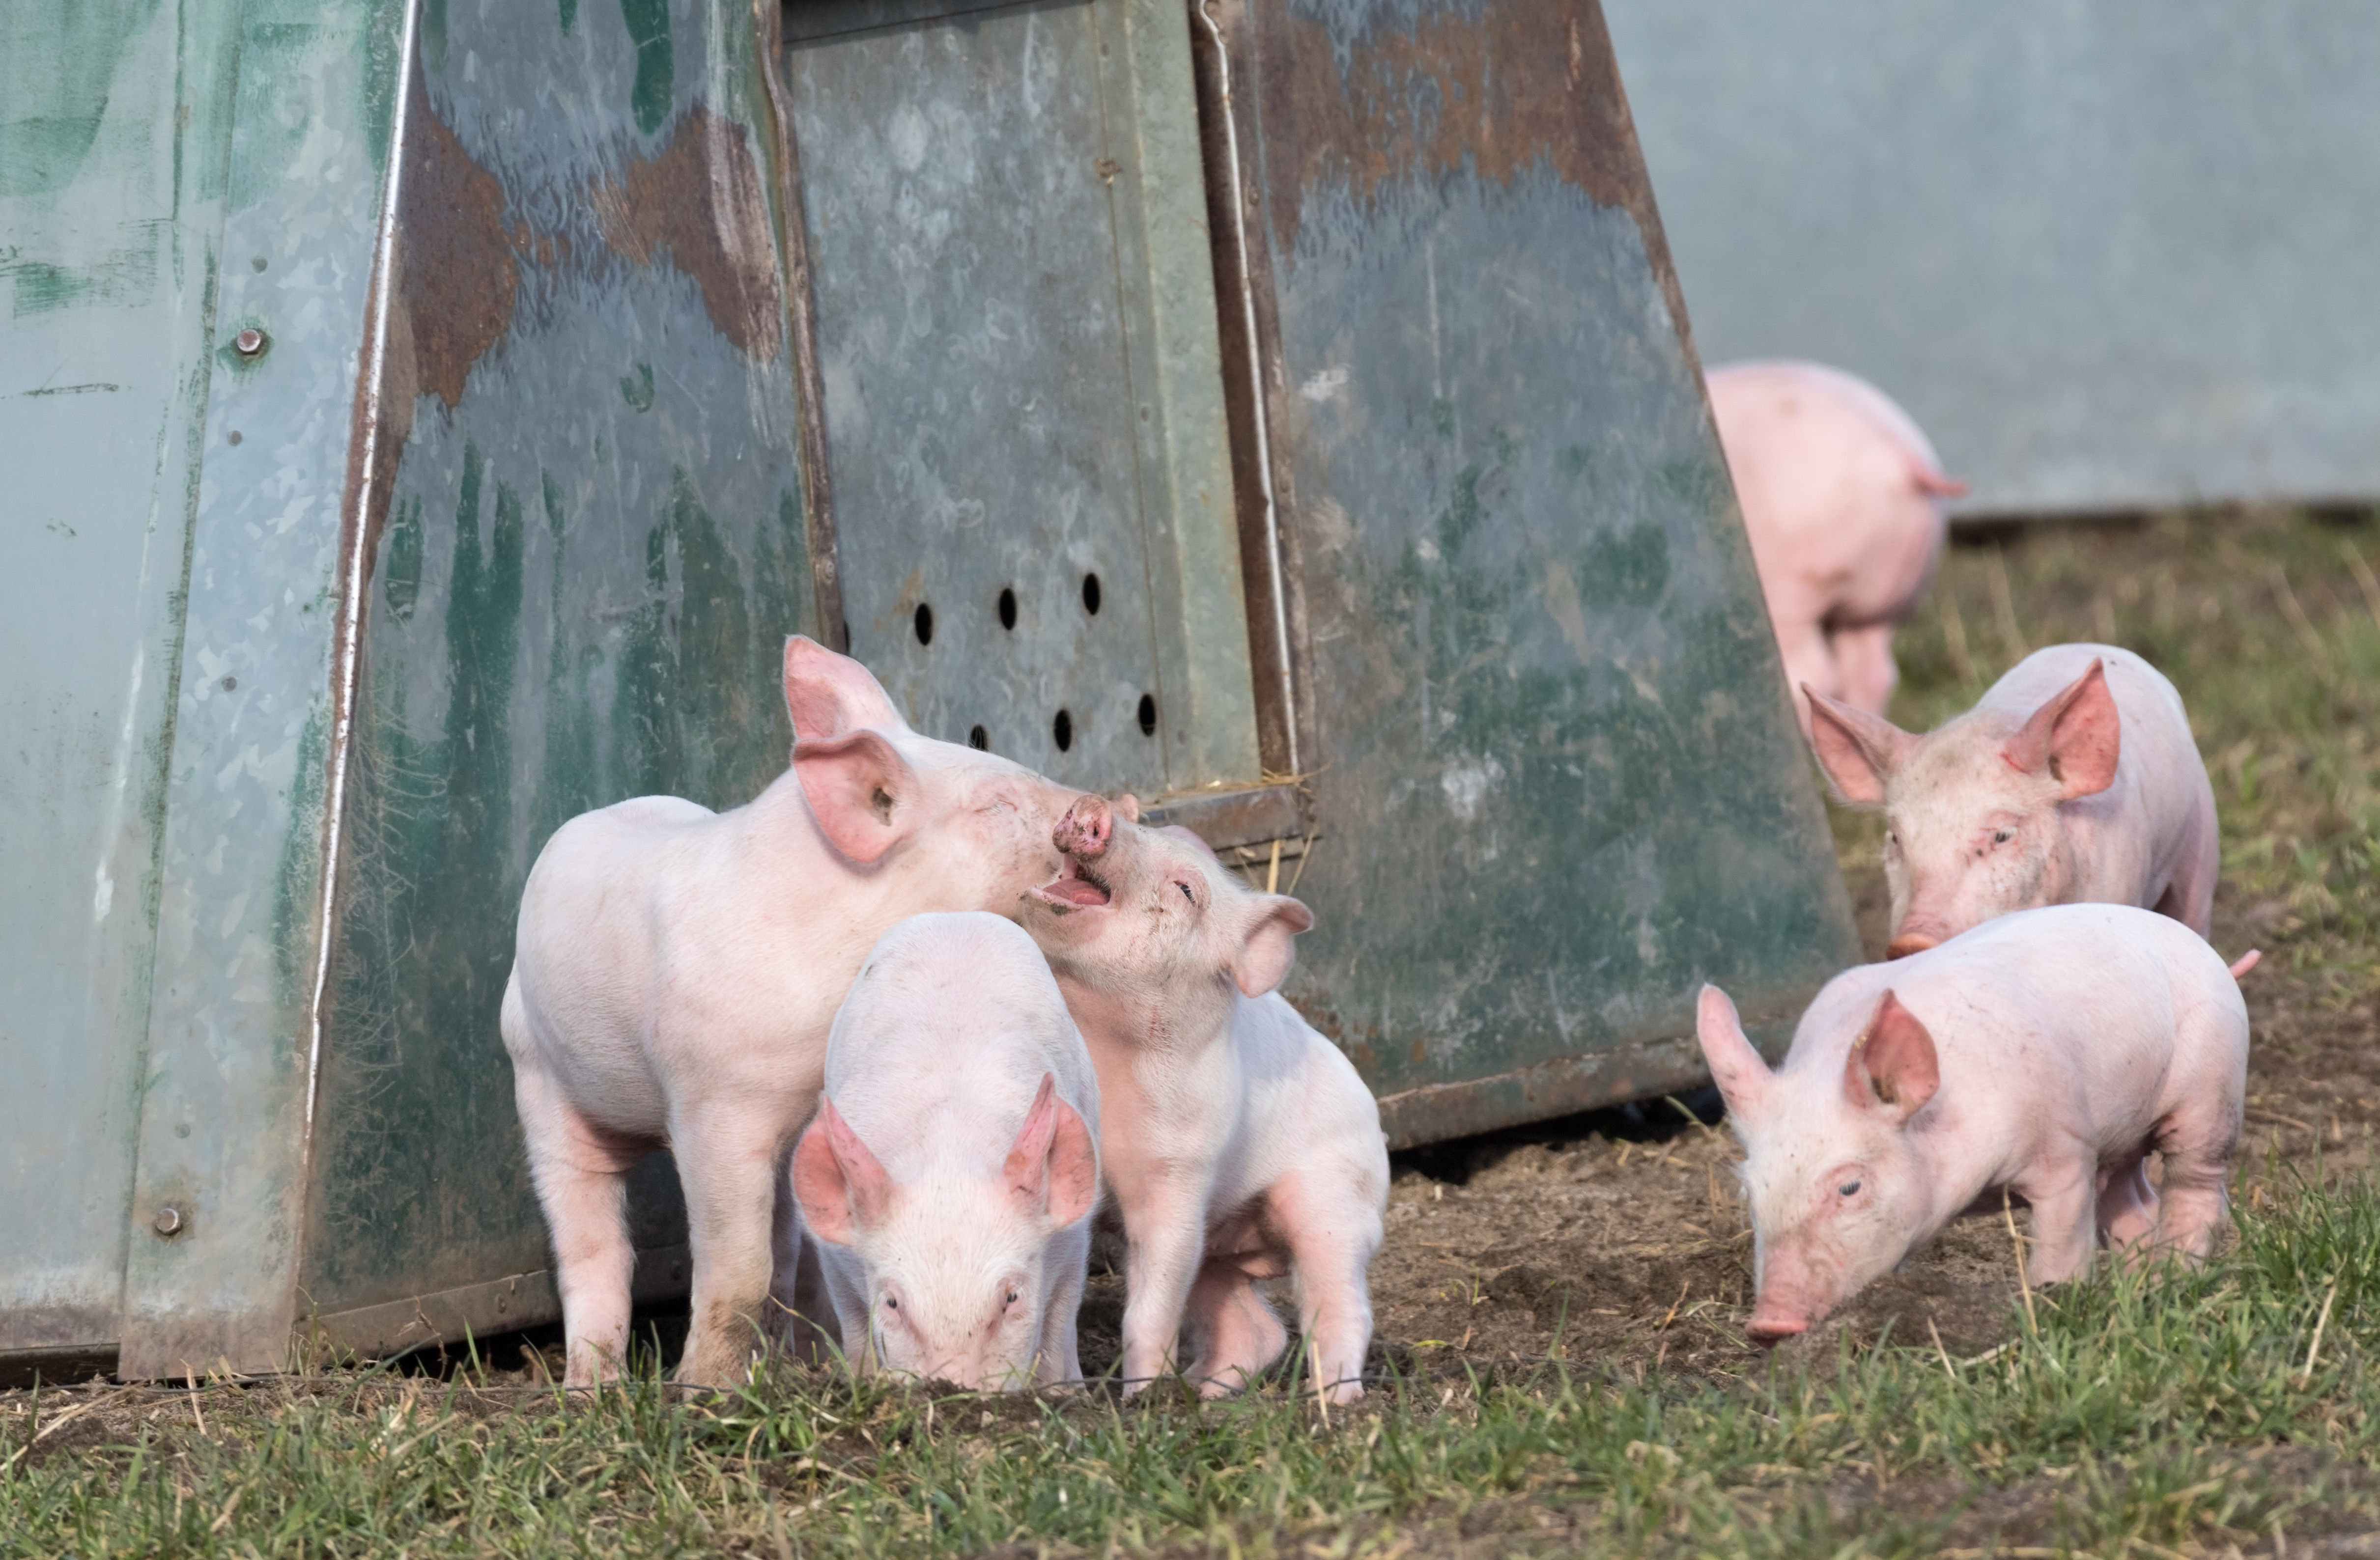 Playful and exuberant outdoor piglets in front of a sheet metal hut